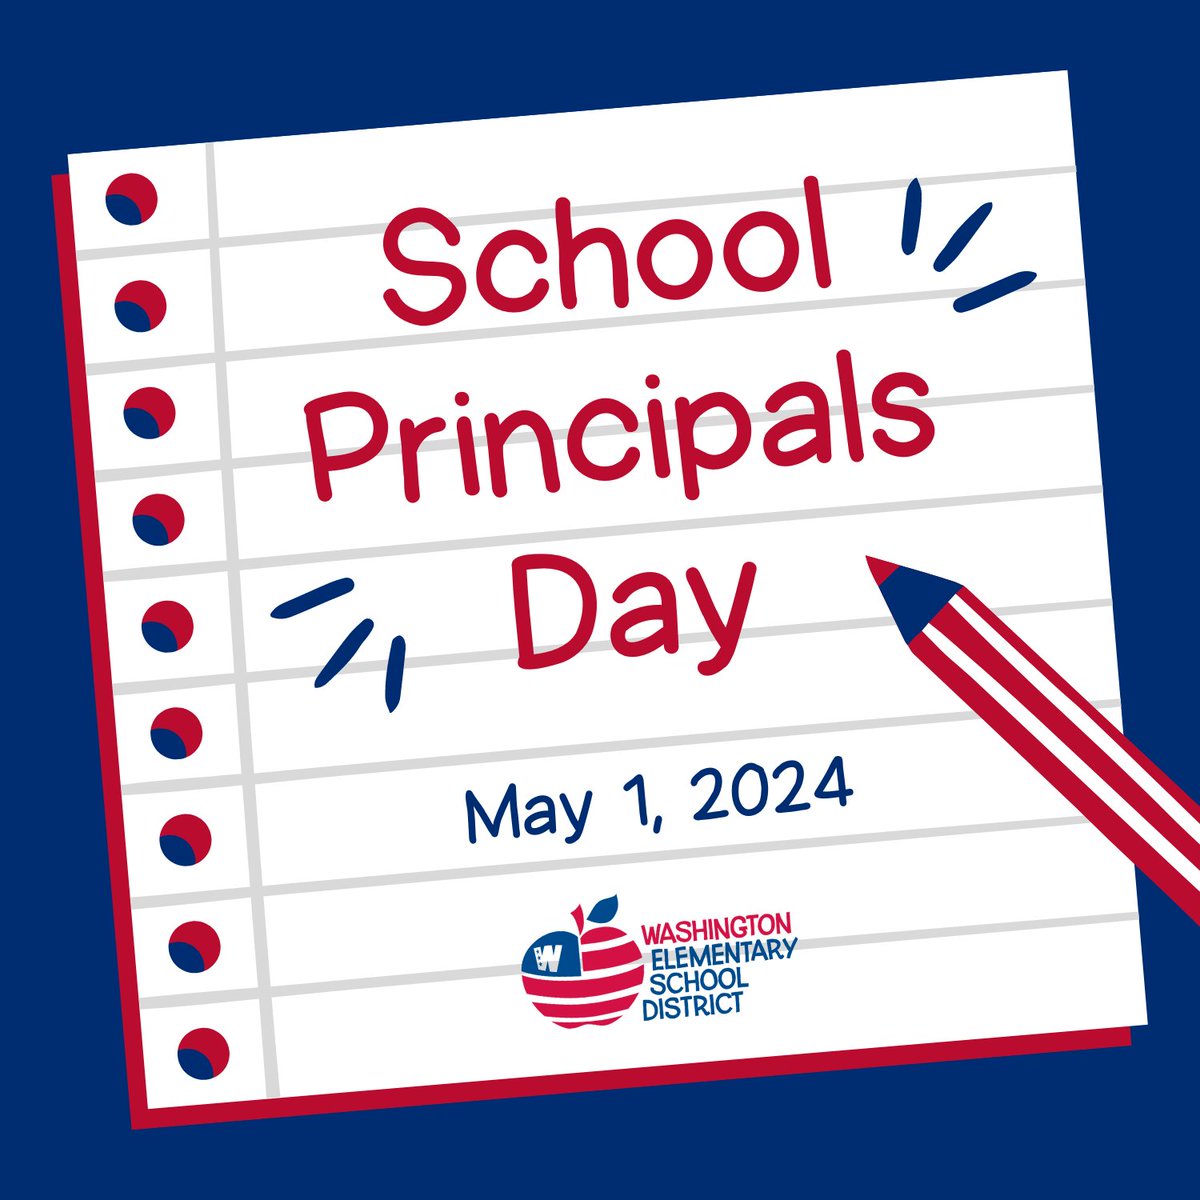 It's National School Principals Day! We are truly fortunate to have amazing leaders at all of our schools! The #WESDFamily is thankful for all that they do every day for their students, families, staff and communities!